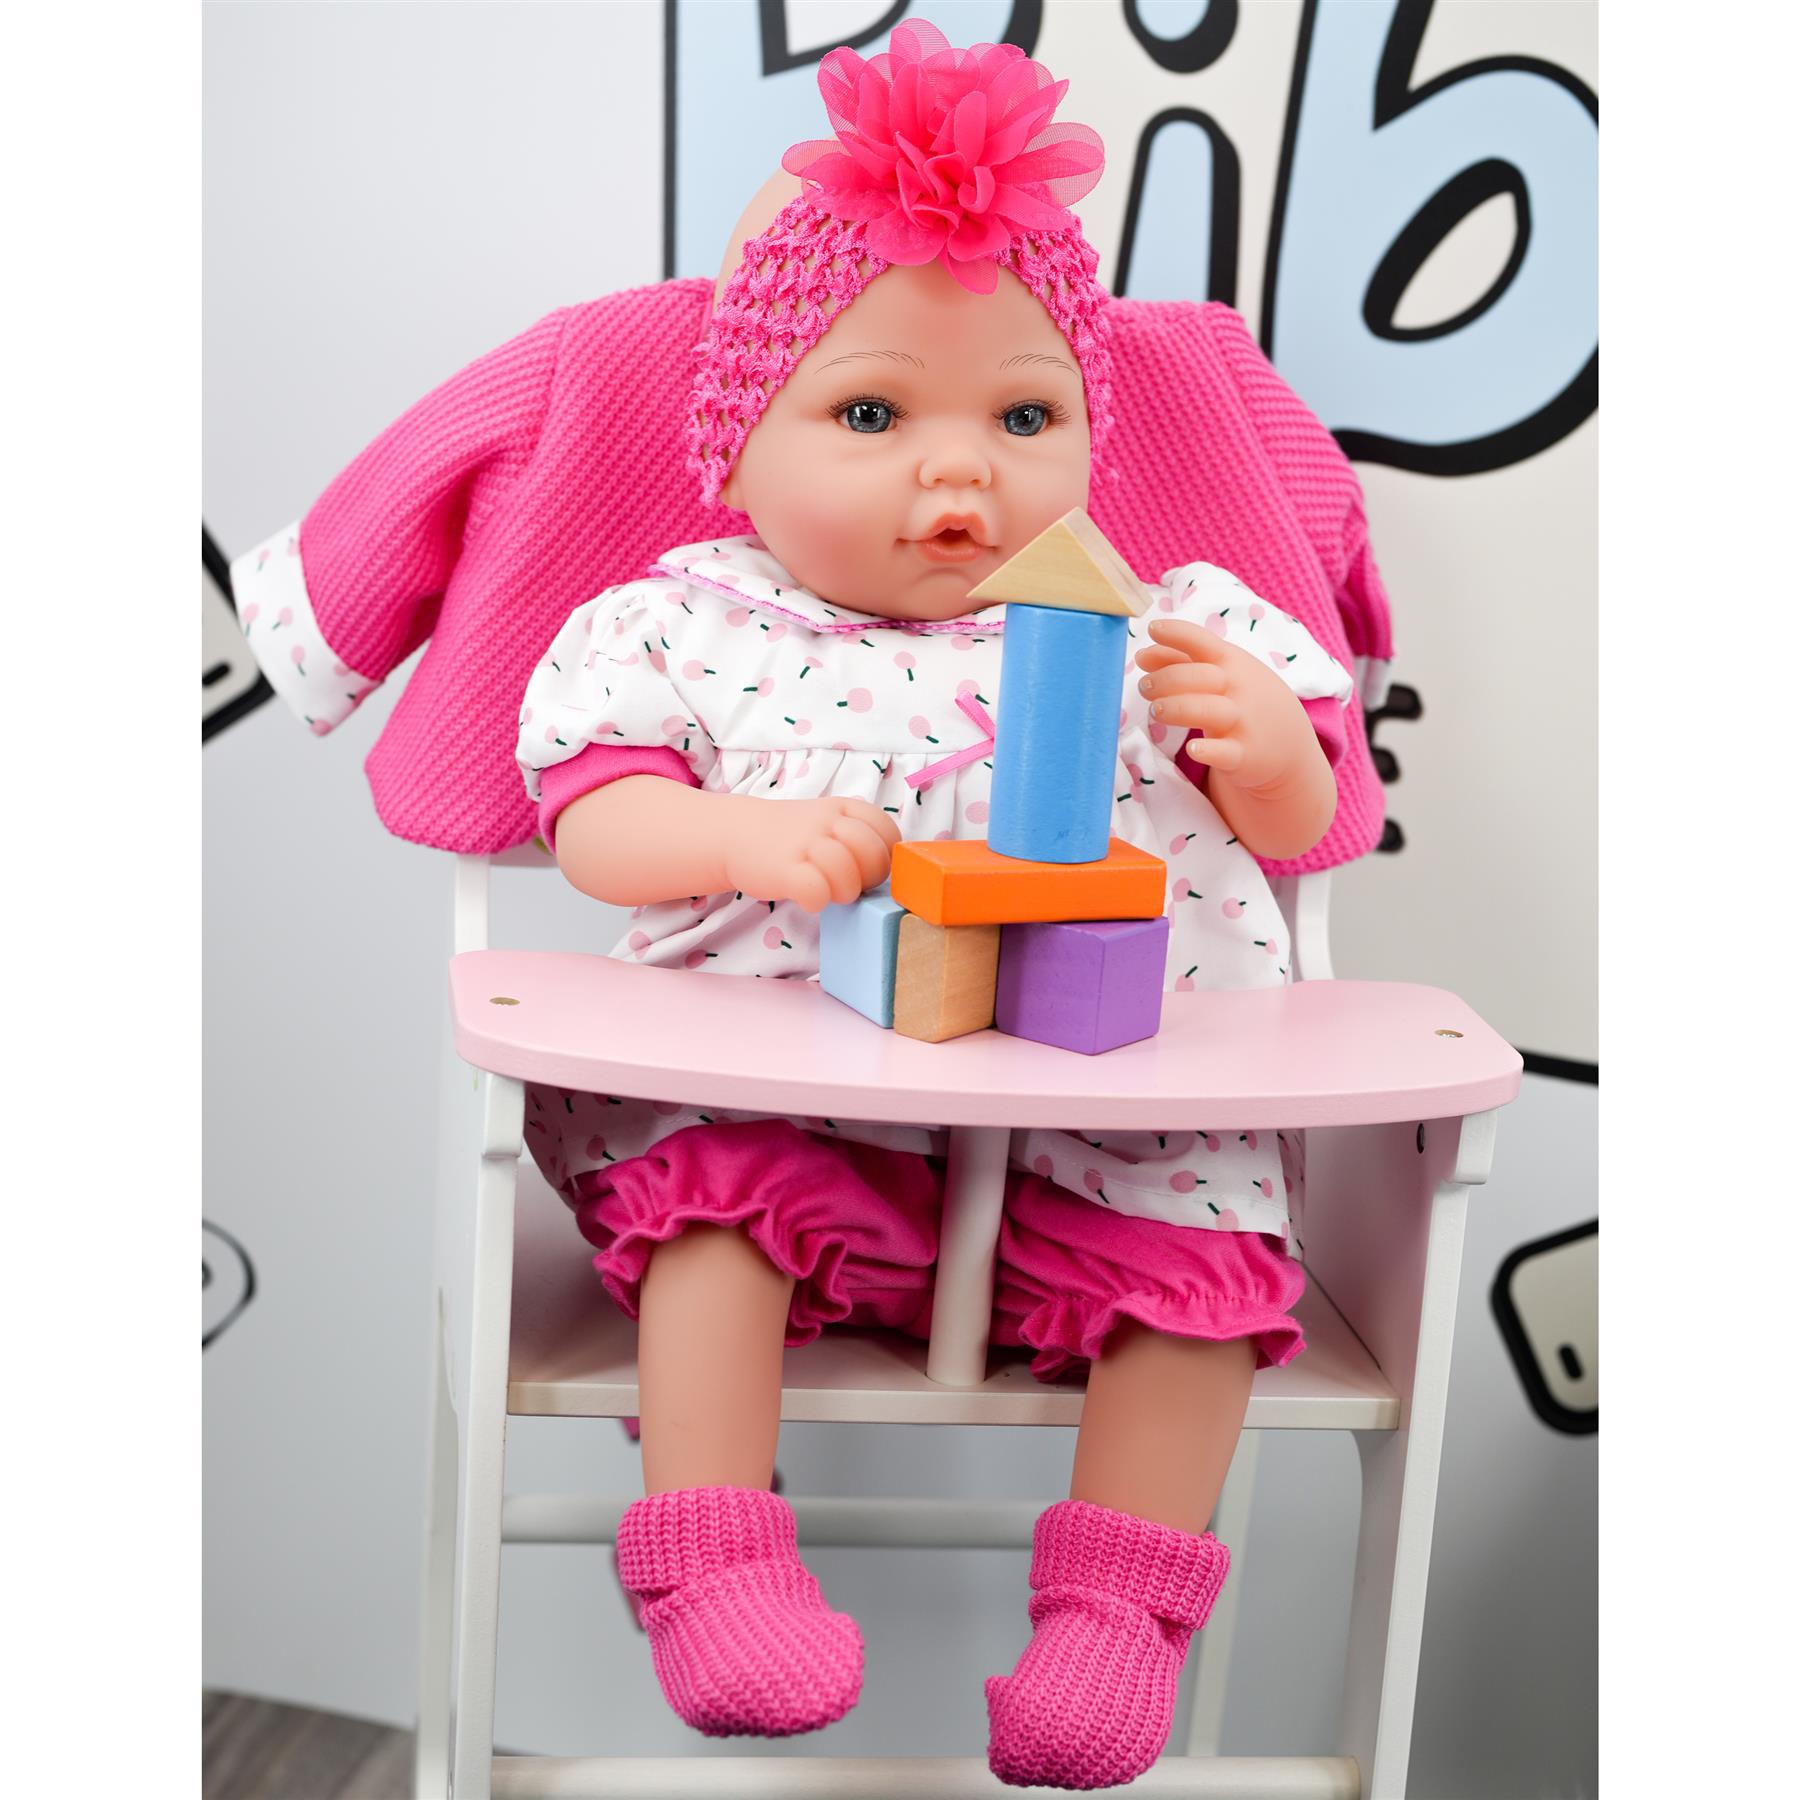 BiBi Outfits - Reborn Doll Clothes (Hot Pink) (50 cm / 20") by BiBi Doll - The Magic Toy Shop